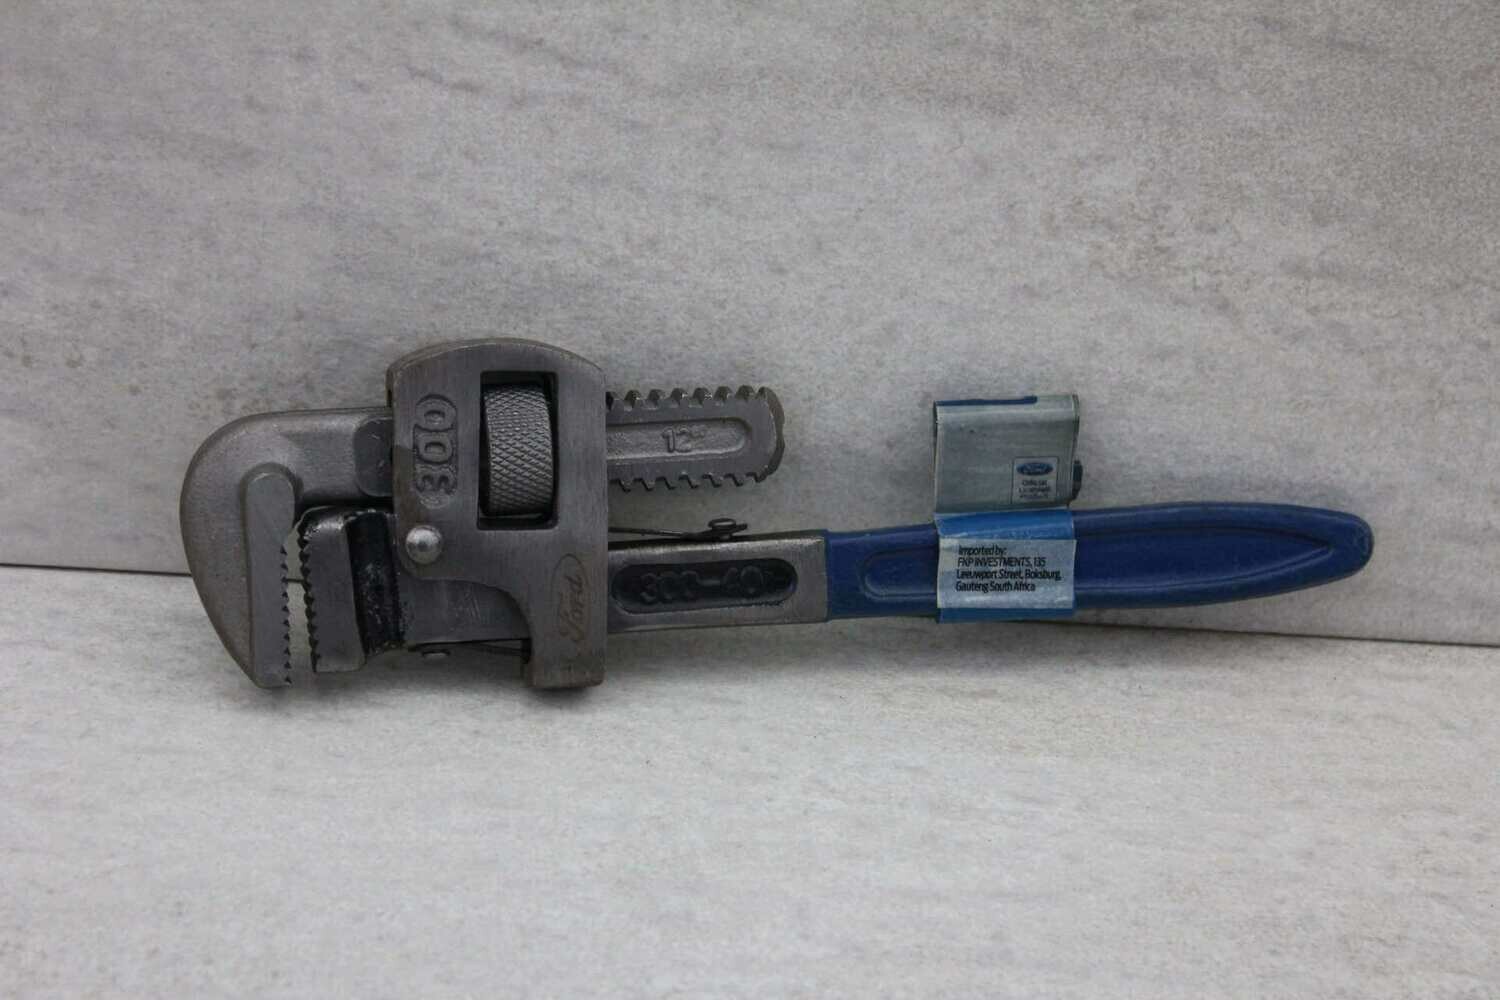 Ford pipe wrench